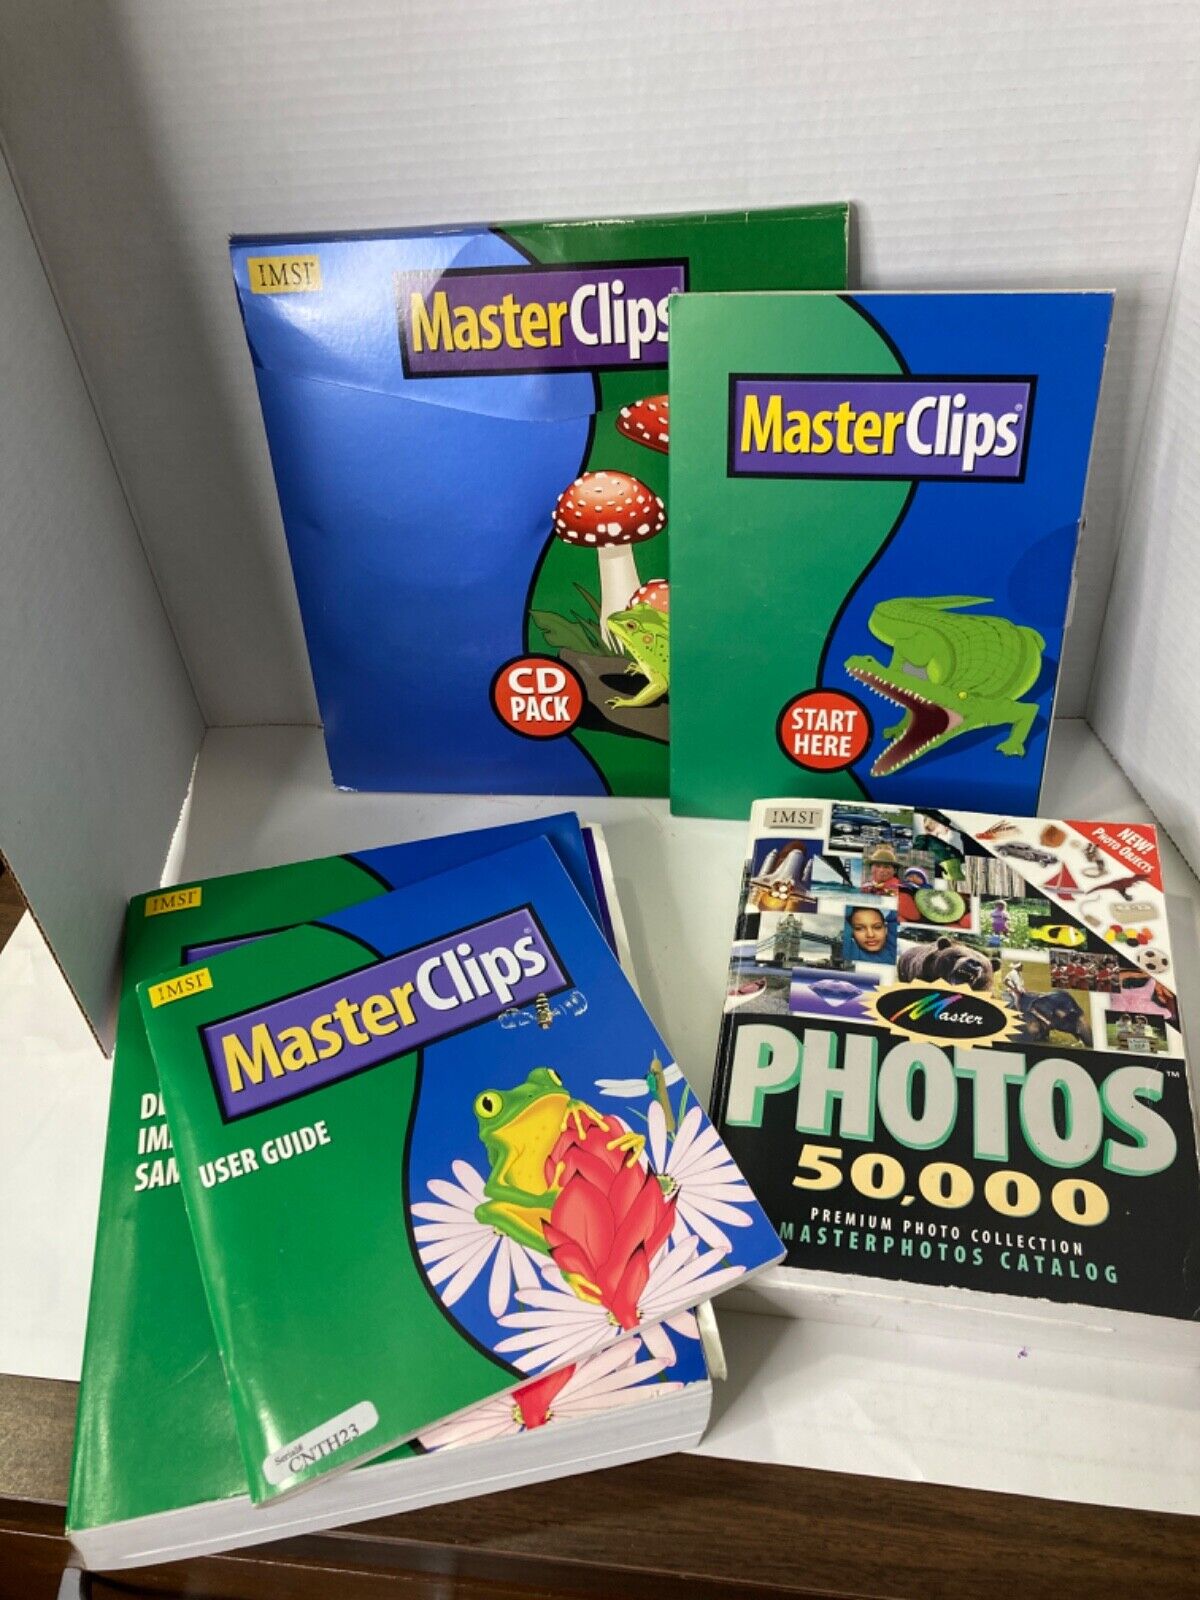 Master Clips Books and 28 CD;s with 50000 Photos, 500000 images complete IMSI